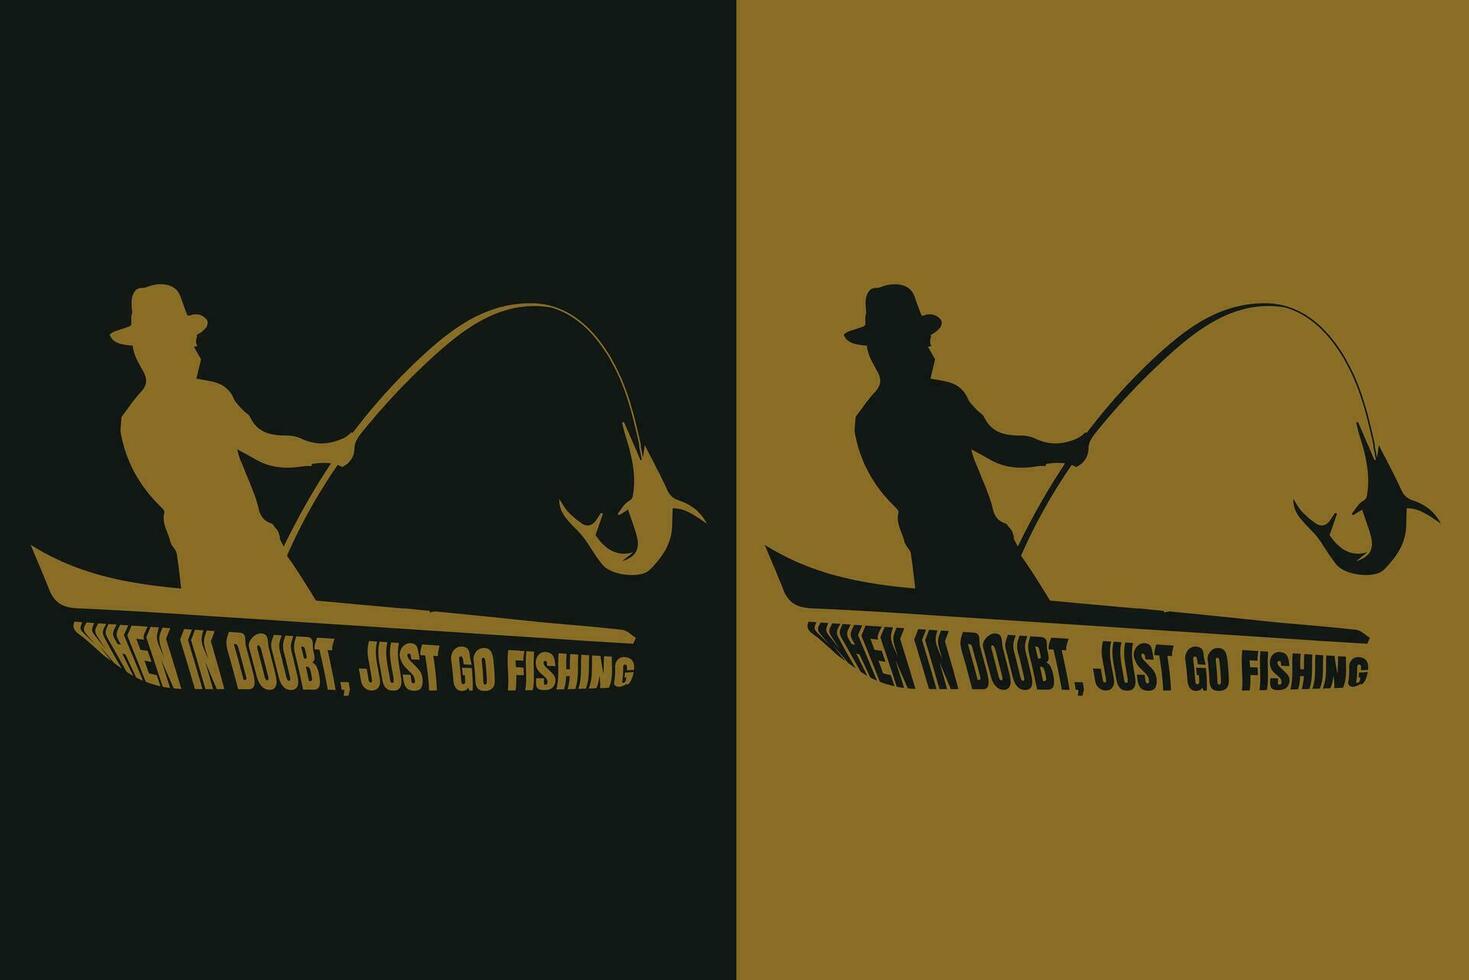 https://static.vecteezy.com/system/resources/previews/027/012/551/non_2x/when-you-doubt-just-go-fishing-fishing-shirt-fisherman-gifts-fisherman-t-shirt-funny-fishing-shirt-present-for-fisherman-fishing-gift-fishing-dad-gifts-fishing-lover-shirt-men-s-fishing-vector.jpg